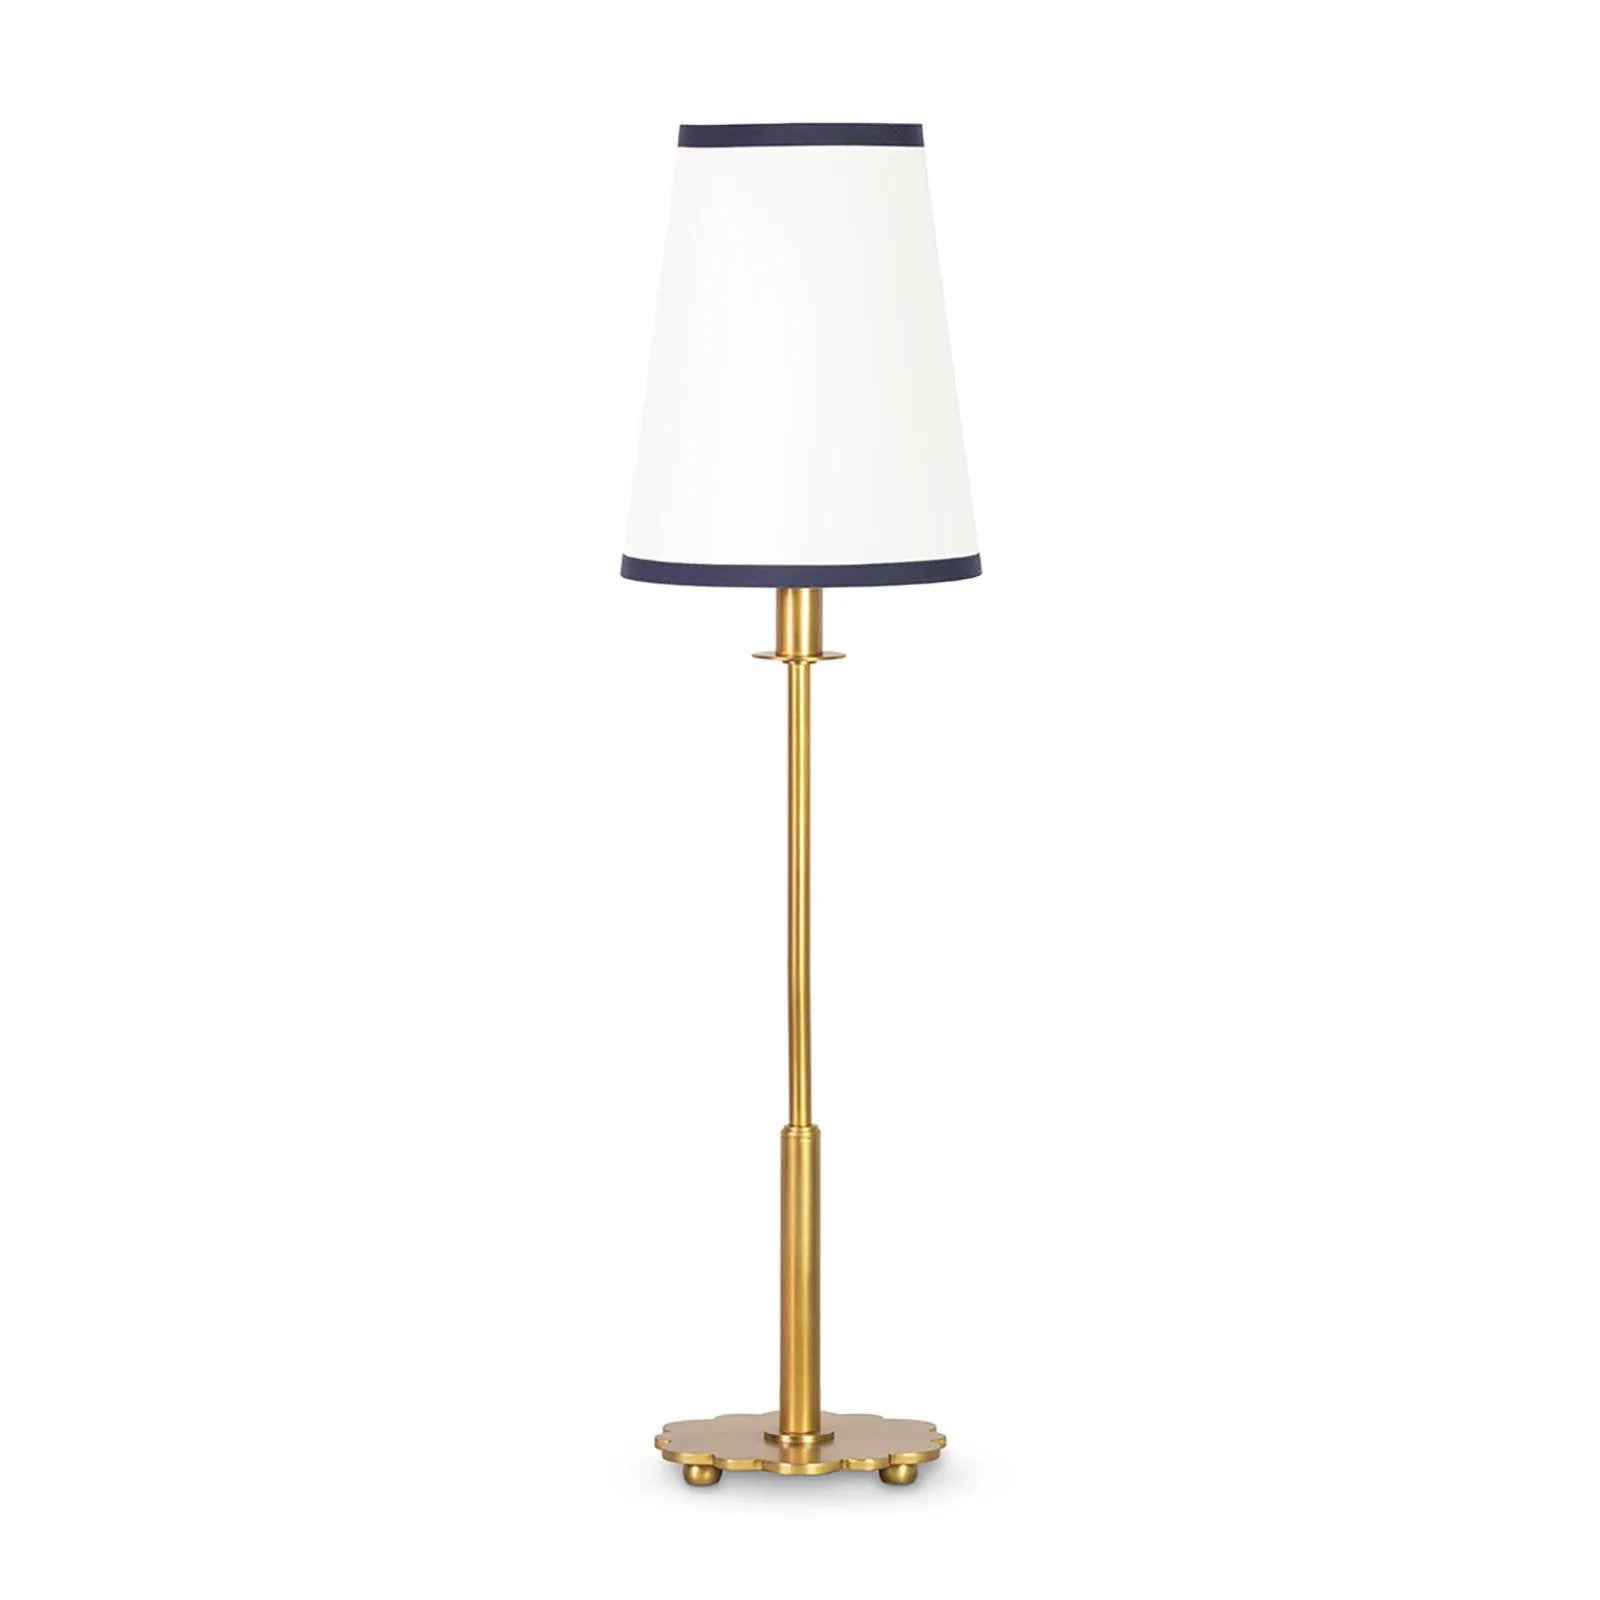 The Daisy Buffet Lamp is an updated classic with fine details such as its namesake daisy-shaped natural brass base and custom natural linen shade with navy trim. A part of our Southern Living Lighting Collection, the Daisy is an elegant addition to a dining room, living room or bedroom. Amethyst Home provides interior design, new home construction design consulting, vintage area rugs, and lighting in the Monterey metro area.